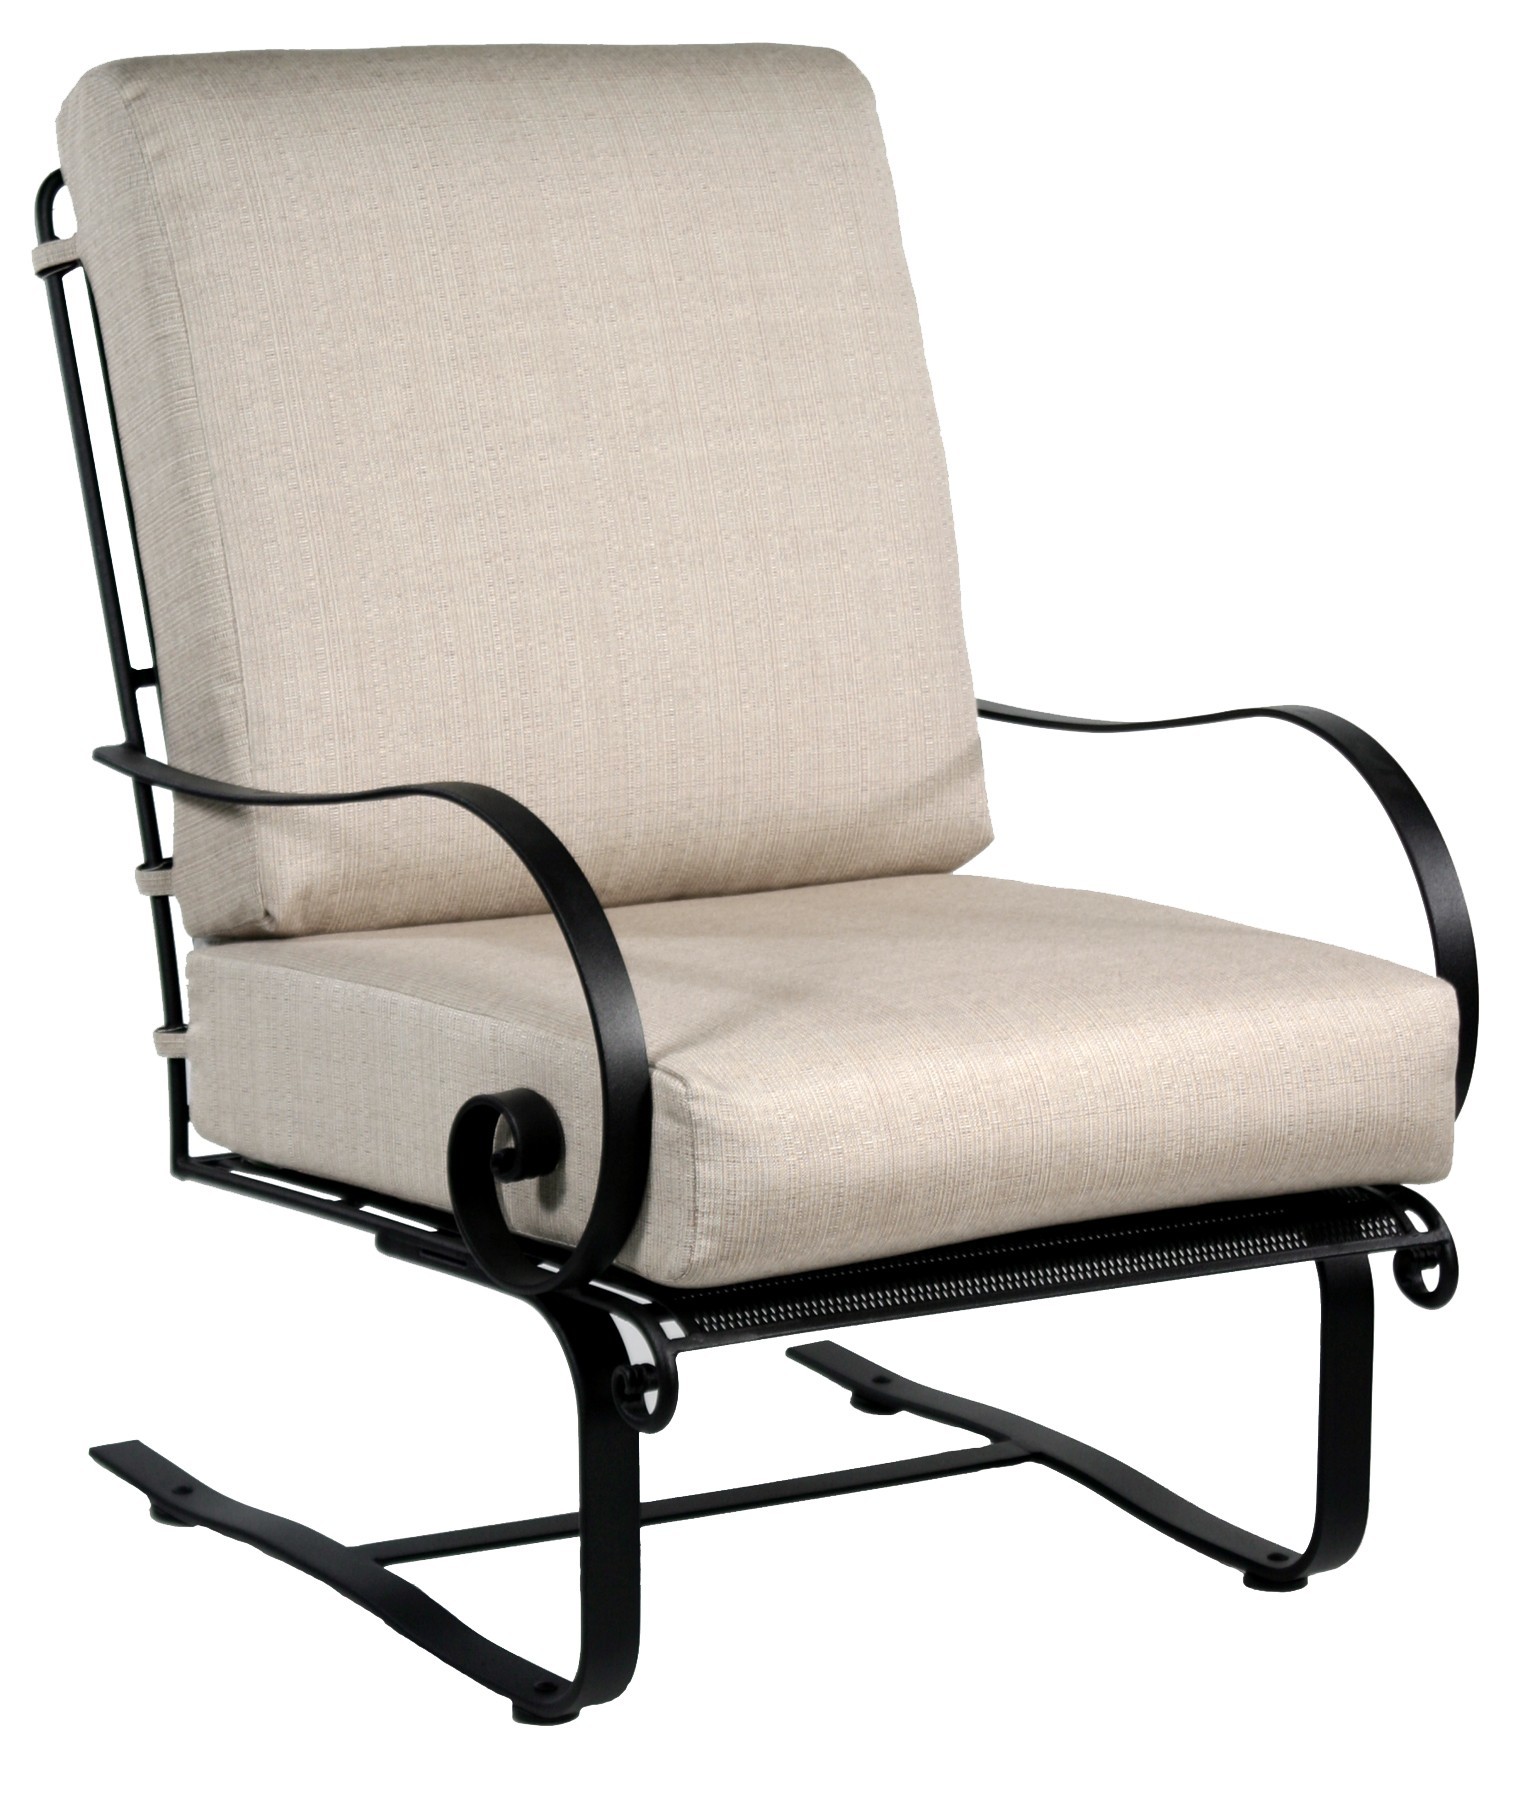 Avalon Spring Base Lounge Chair - Hauser's Patio